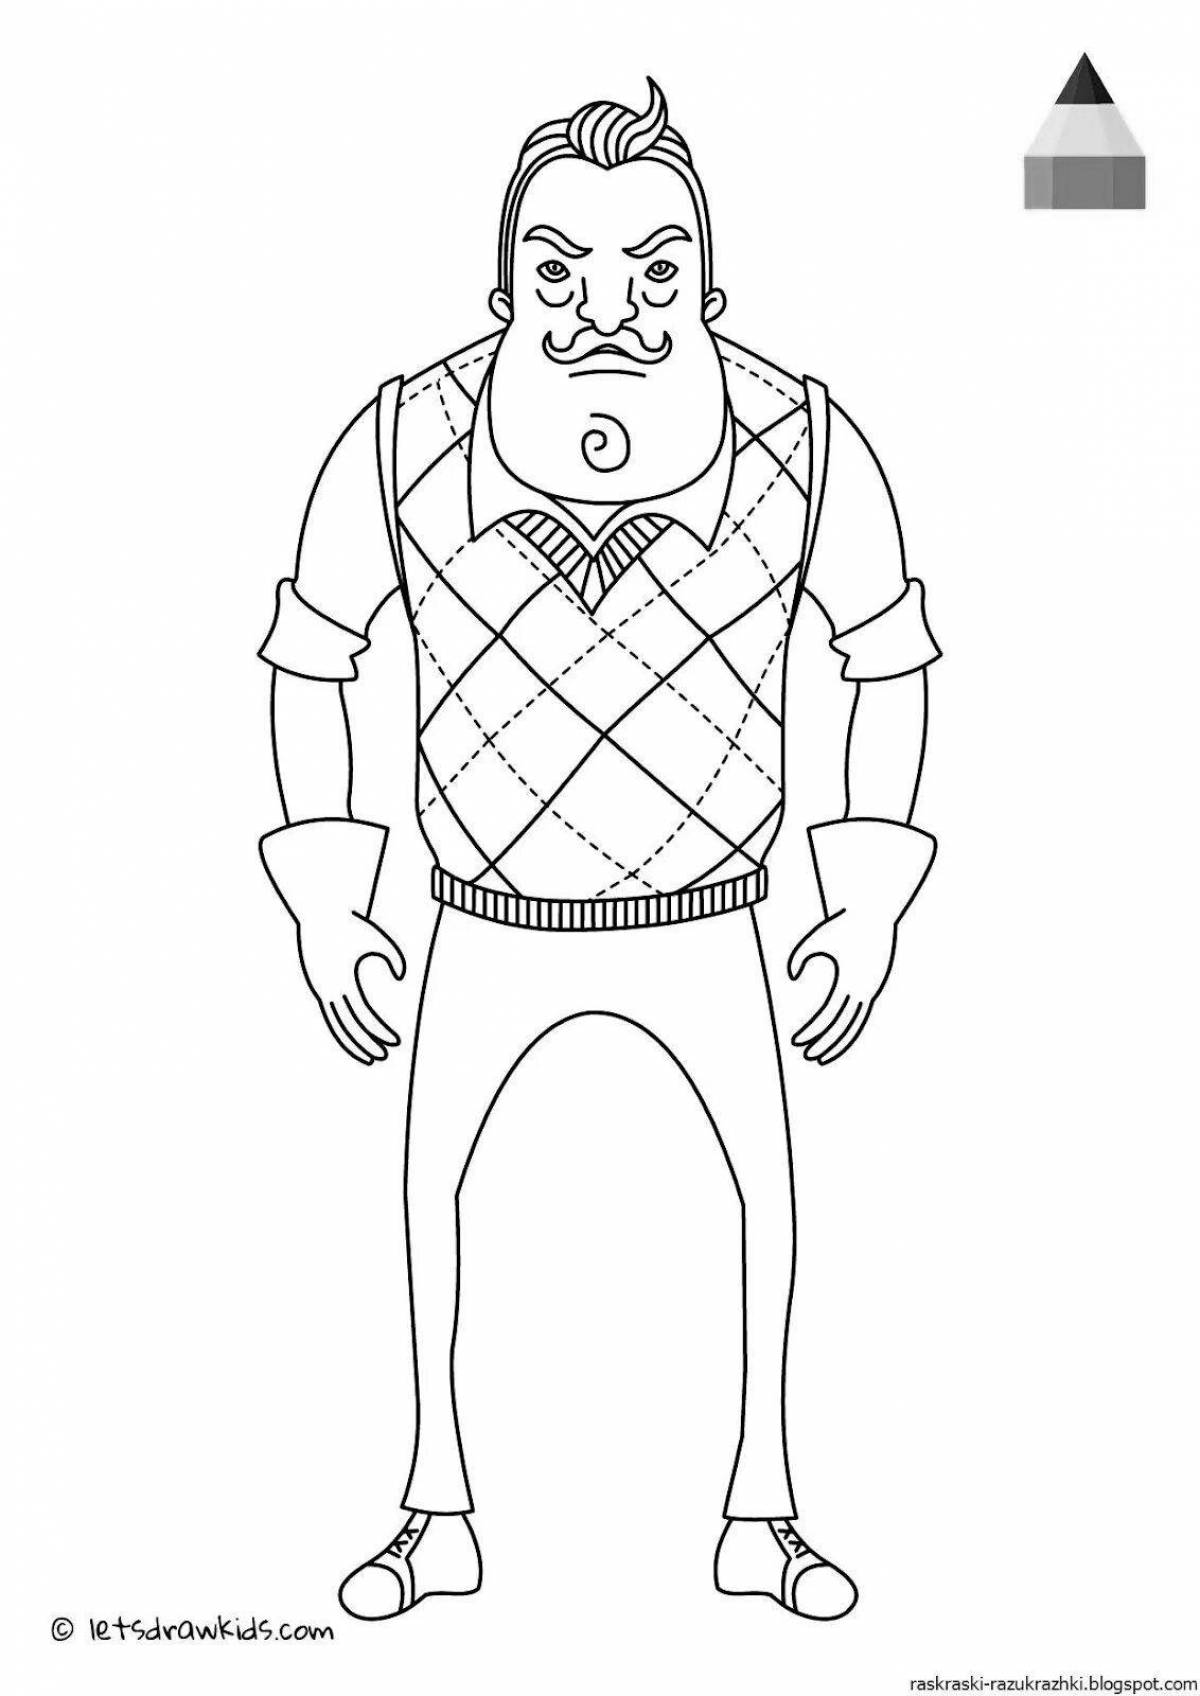 Bold hello neighbor crow coloring page